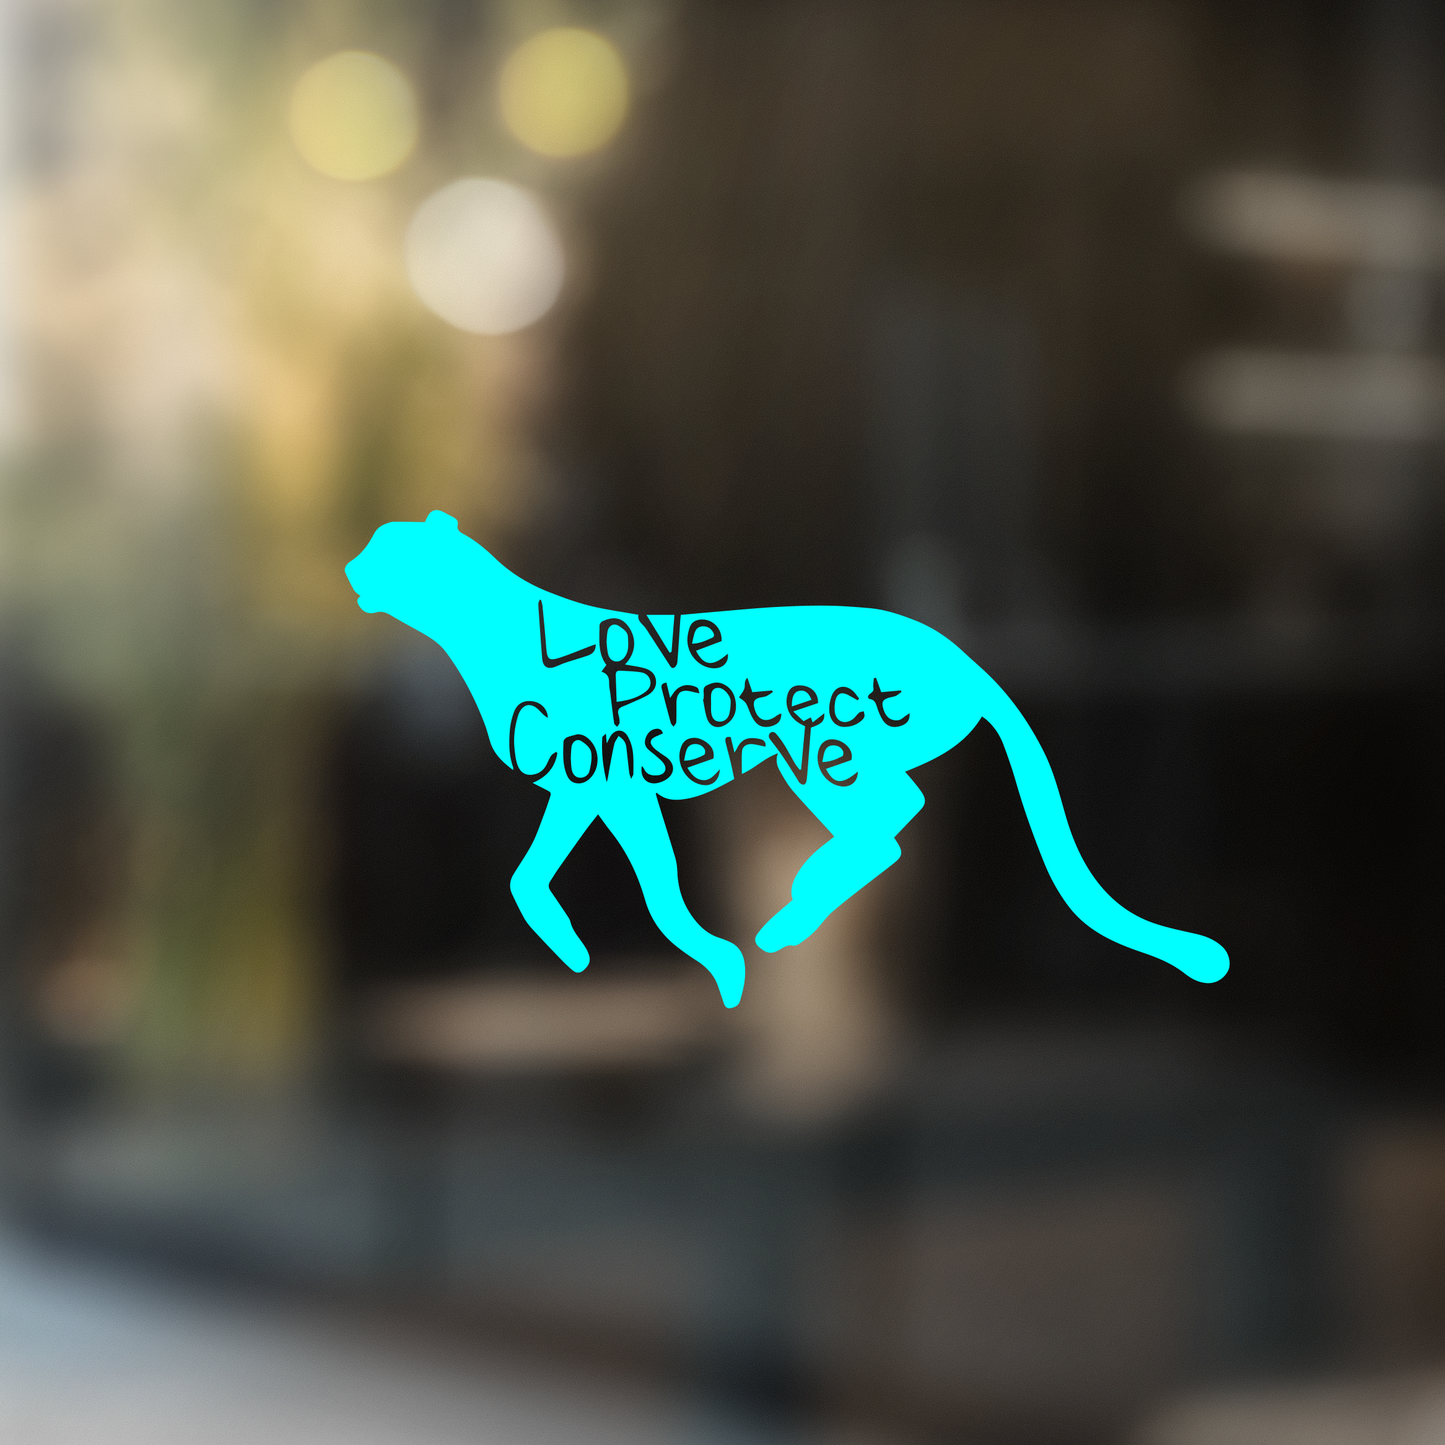 Cheetah - Love Protect Conserve - Vinyl Decal (Made to Order)